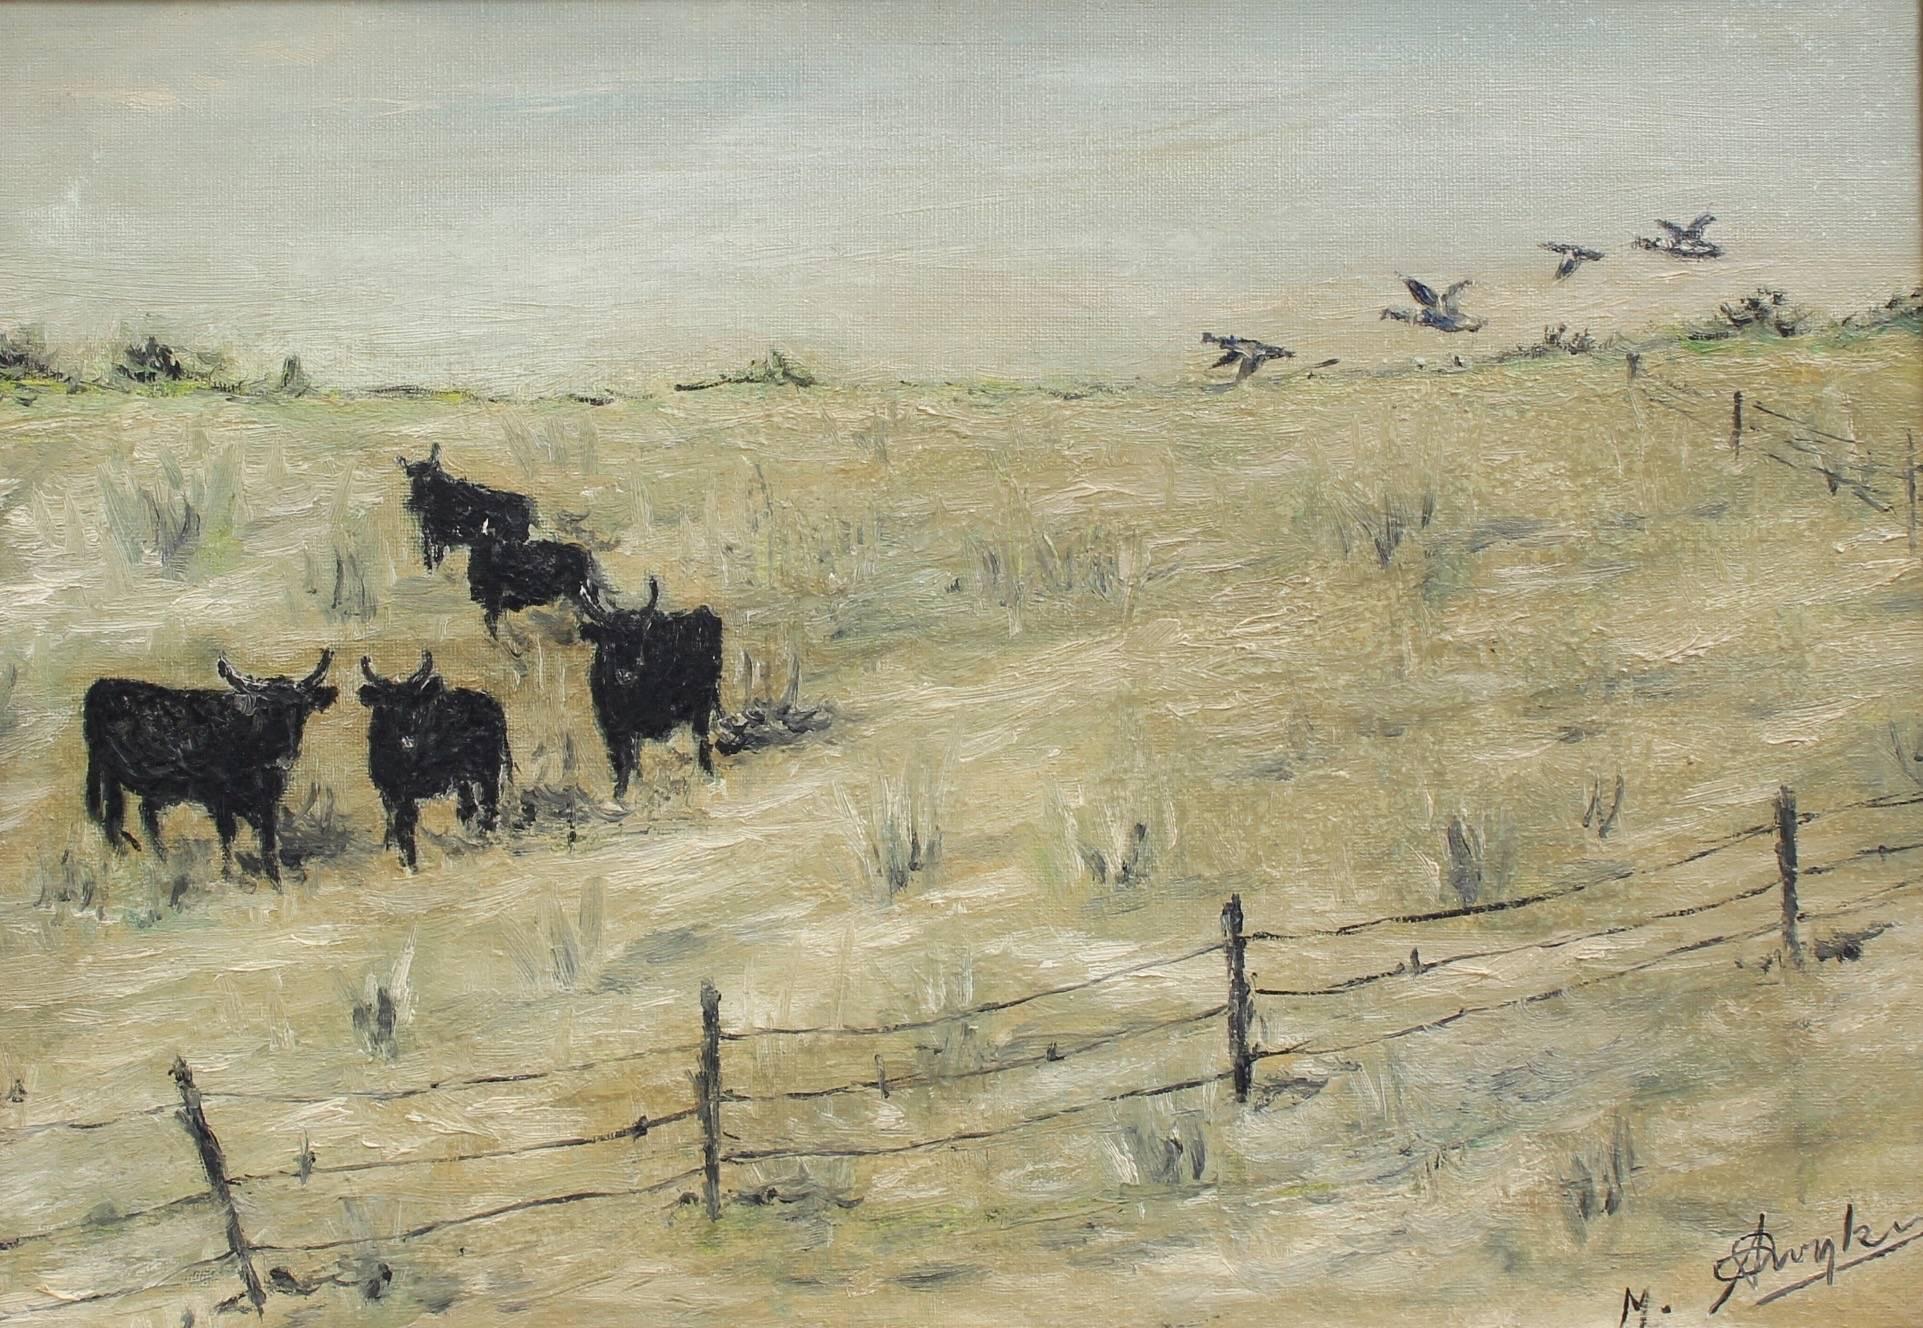 'Grazing Bulls in the Camargue', oil on canvas (circa 1950s), by M. Arvanitakis. Discovered in Provence, this is a bucolic landscape depicting grazing bulls in the Carmargue region of the South of France. The Carmargue is extremely exotic, with tall